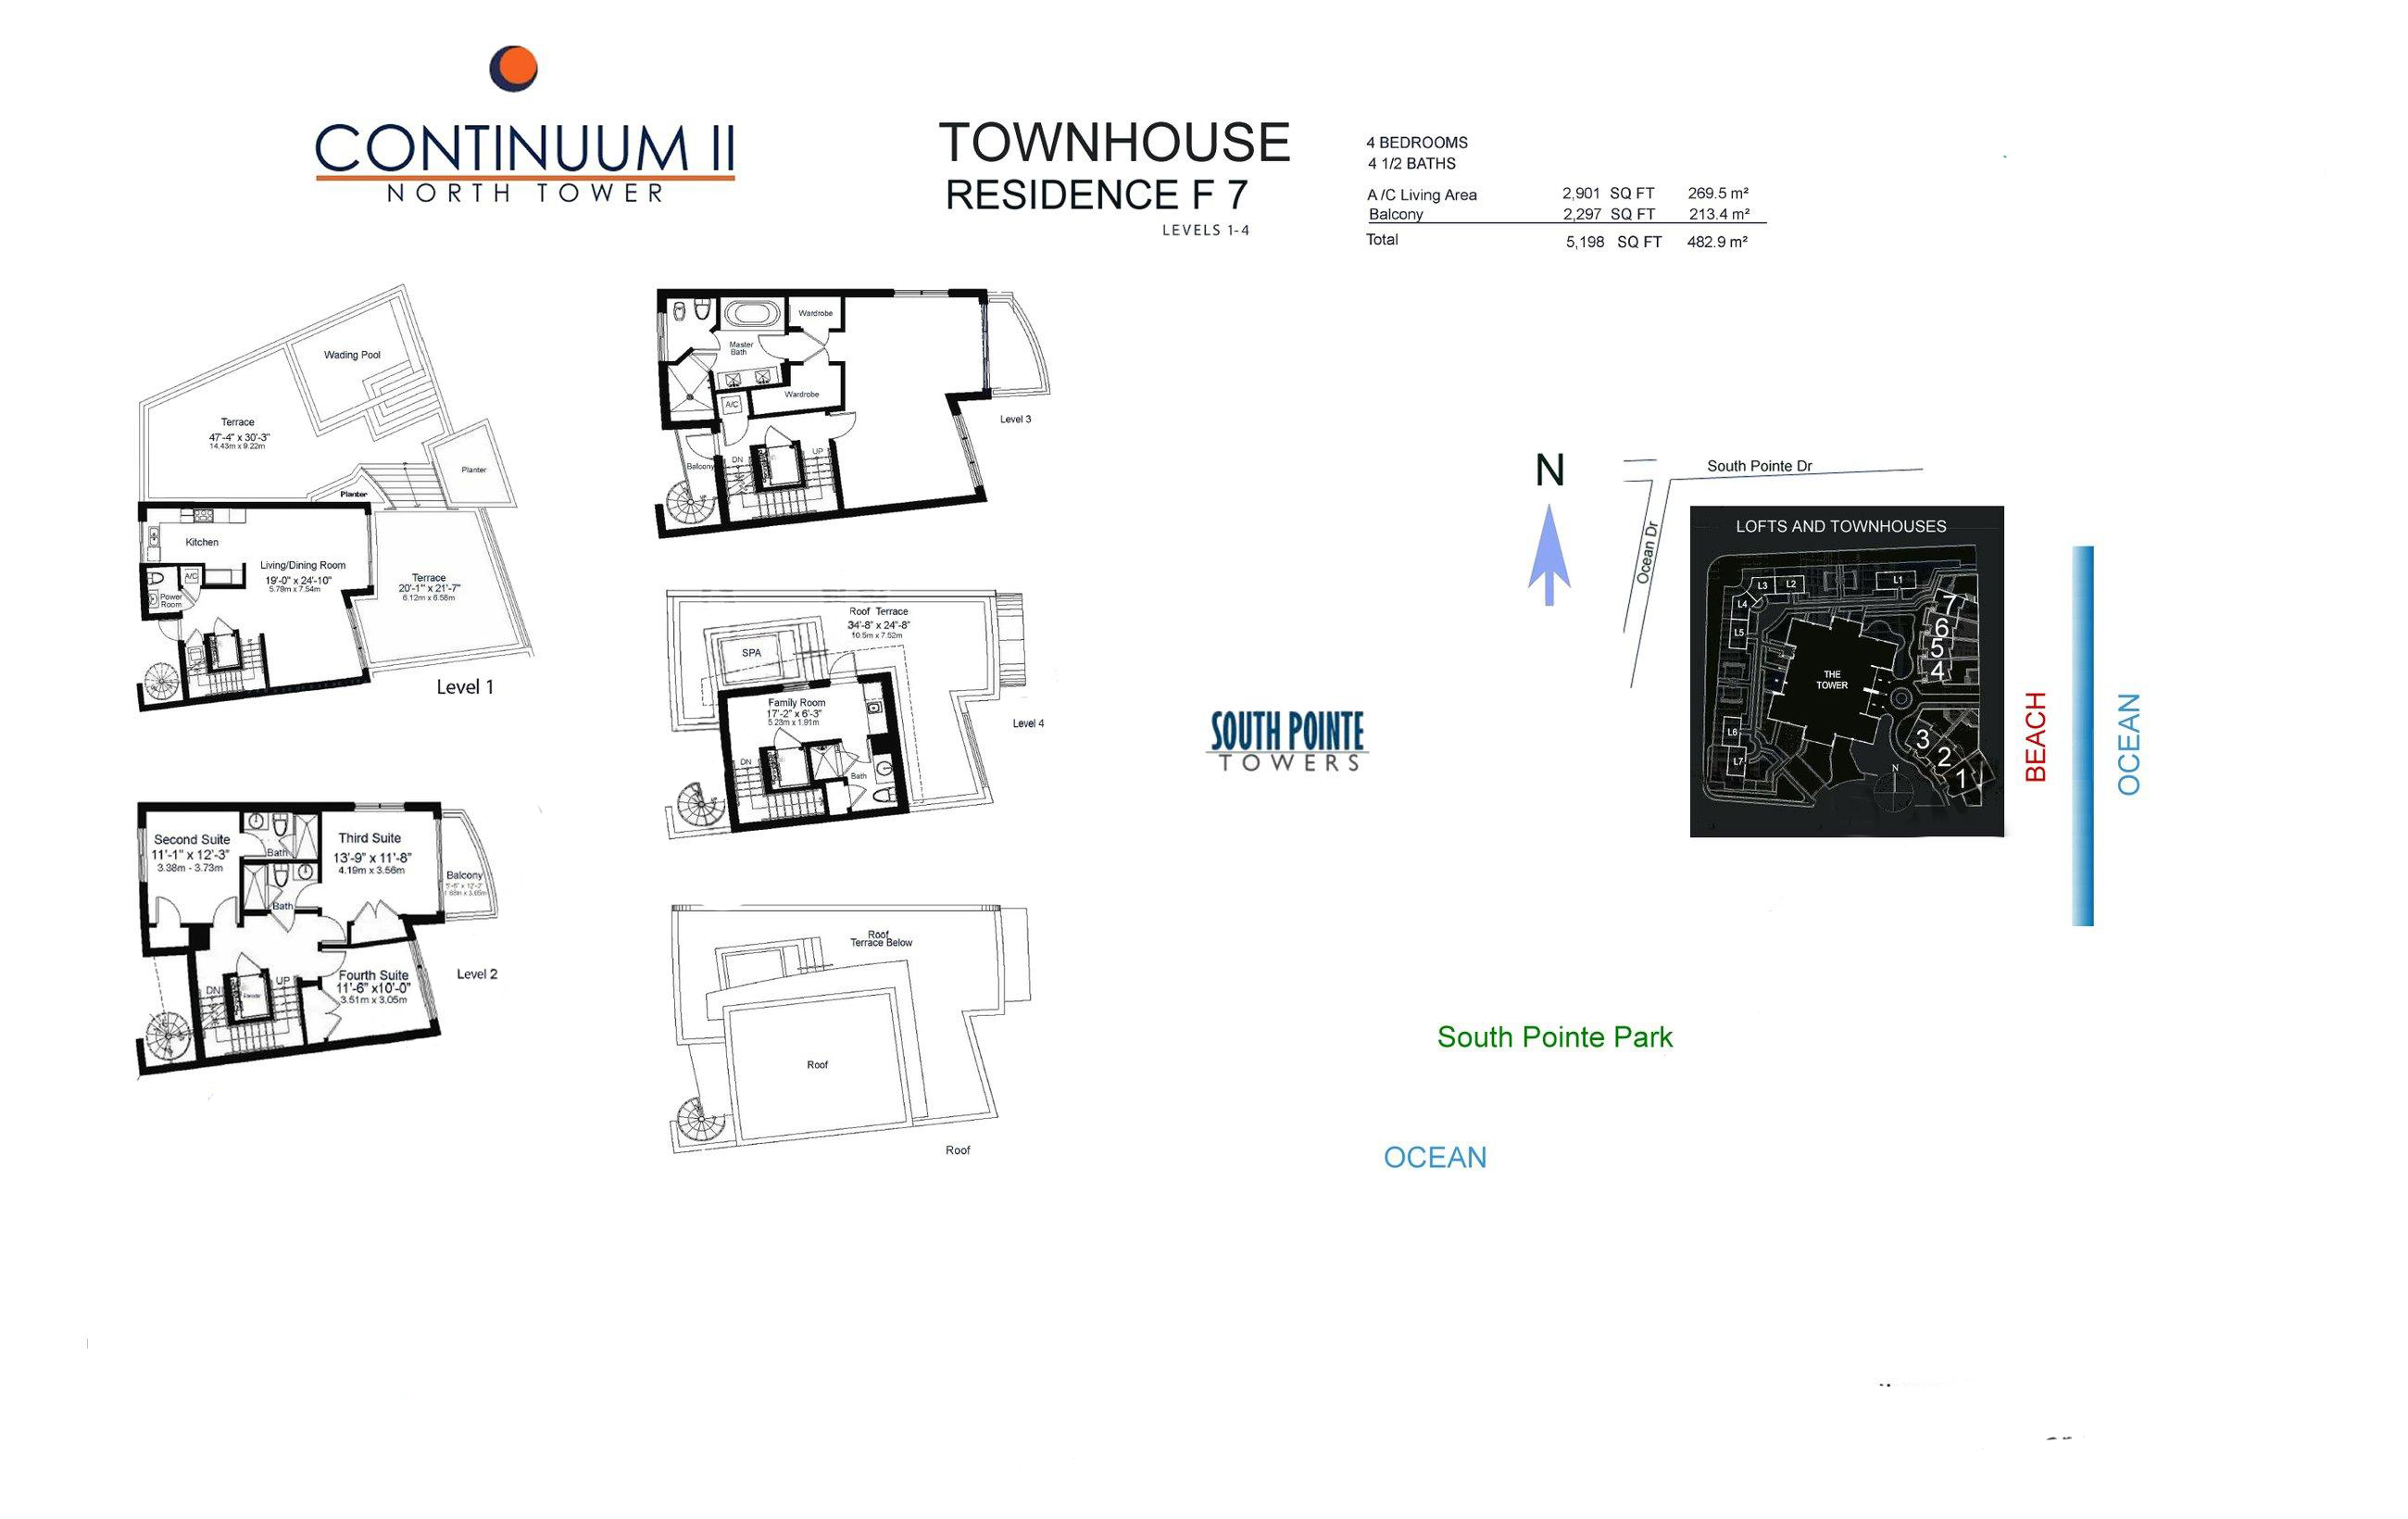 Continuum North Tower Townhouse Residence F7